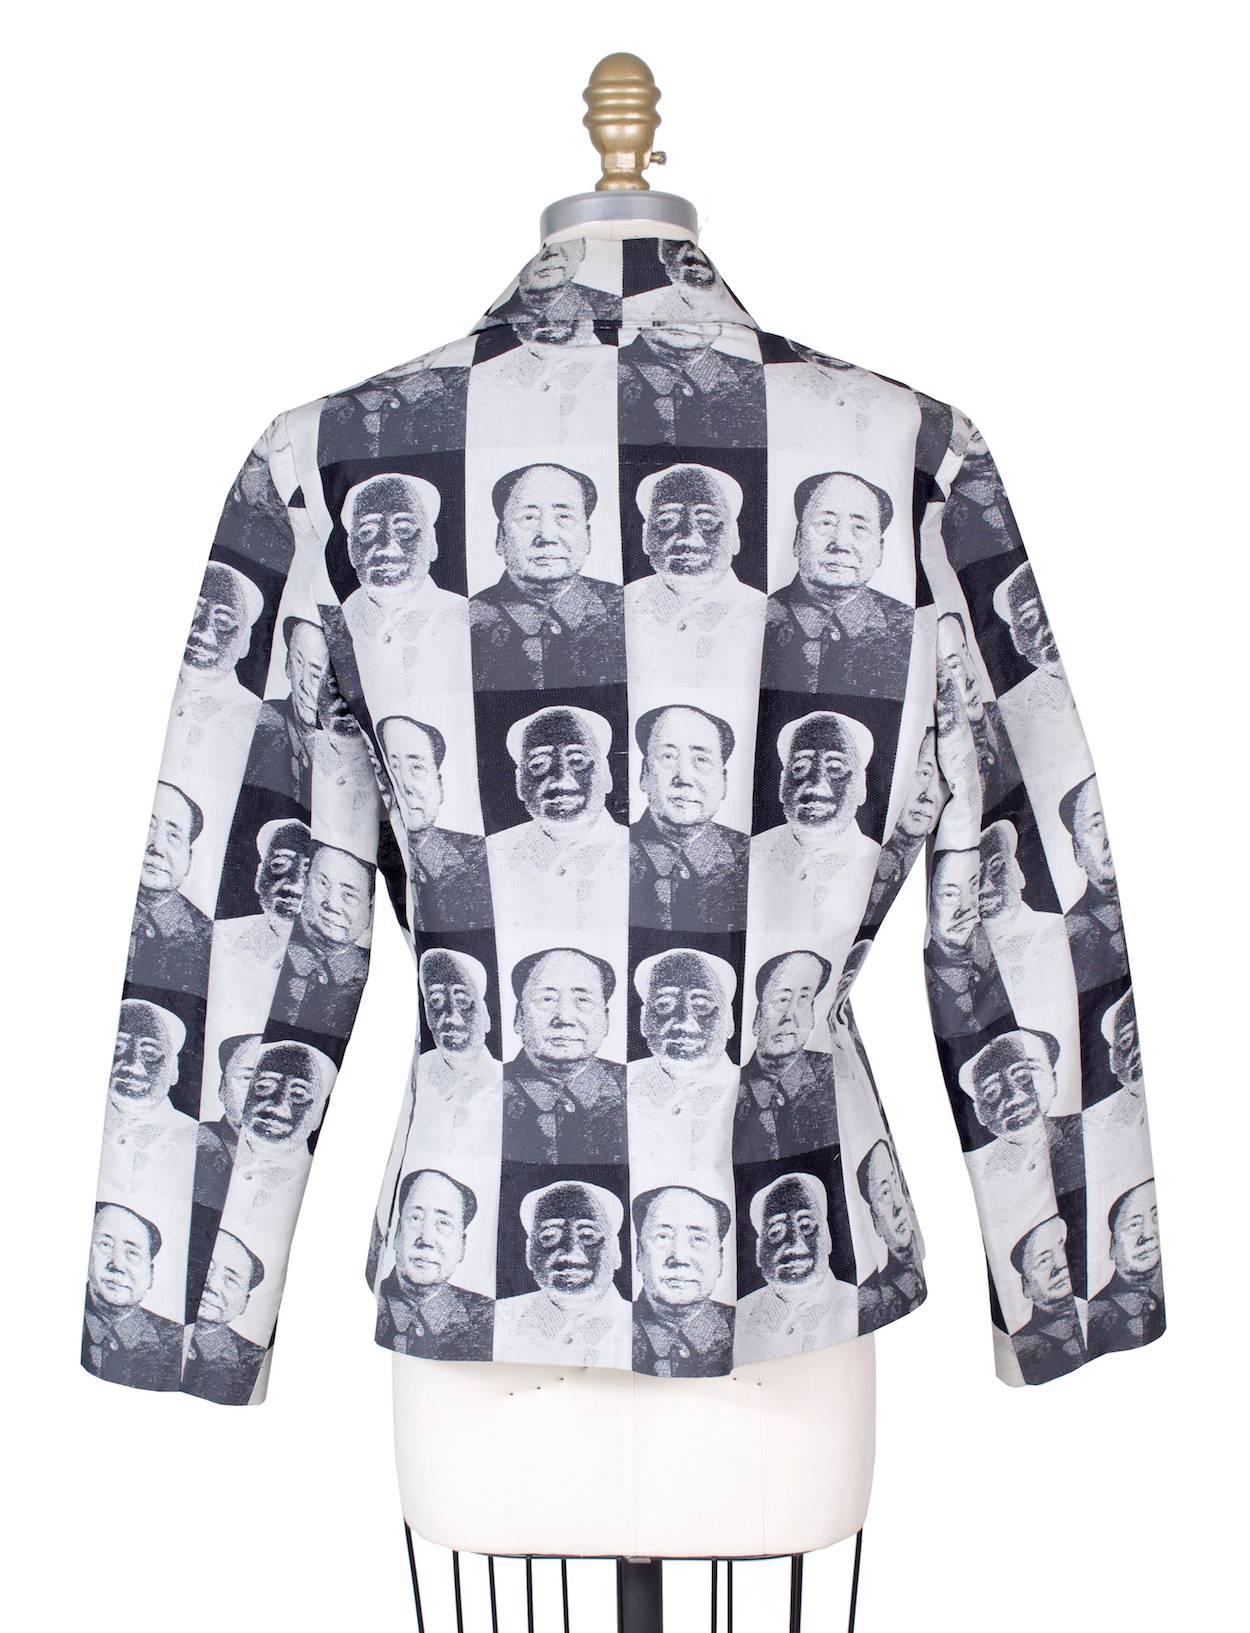 This is a jacket by Vivienne Tam from 1995.  It features a black and white pop art Mao print.  The shell is a water resistant polyester and is lined in satin.

15